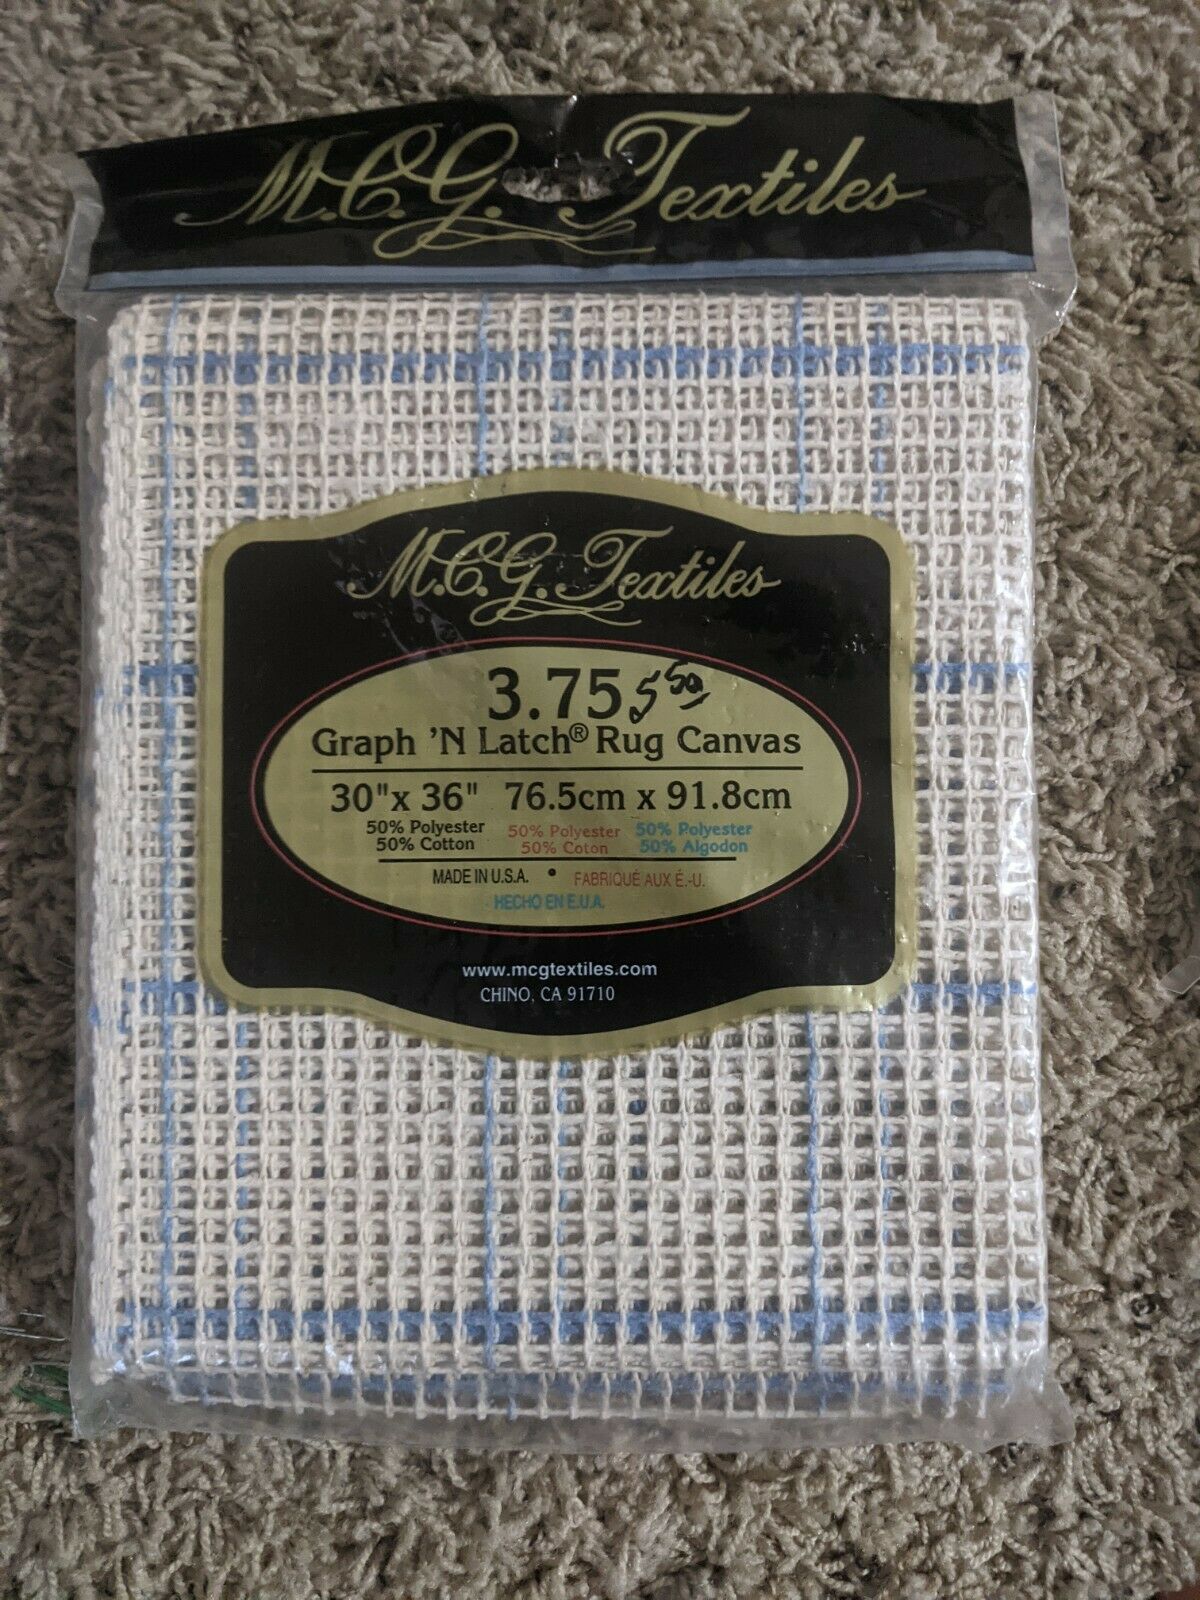 Mcg Textiles Graph ‘n Latch Rug Canvas 30x36” - New In Package